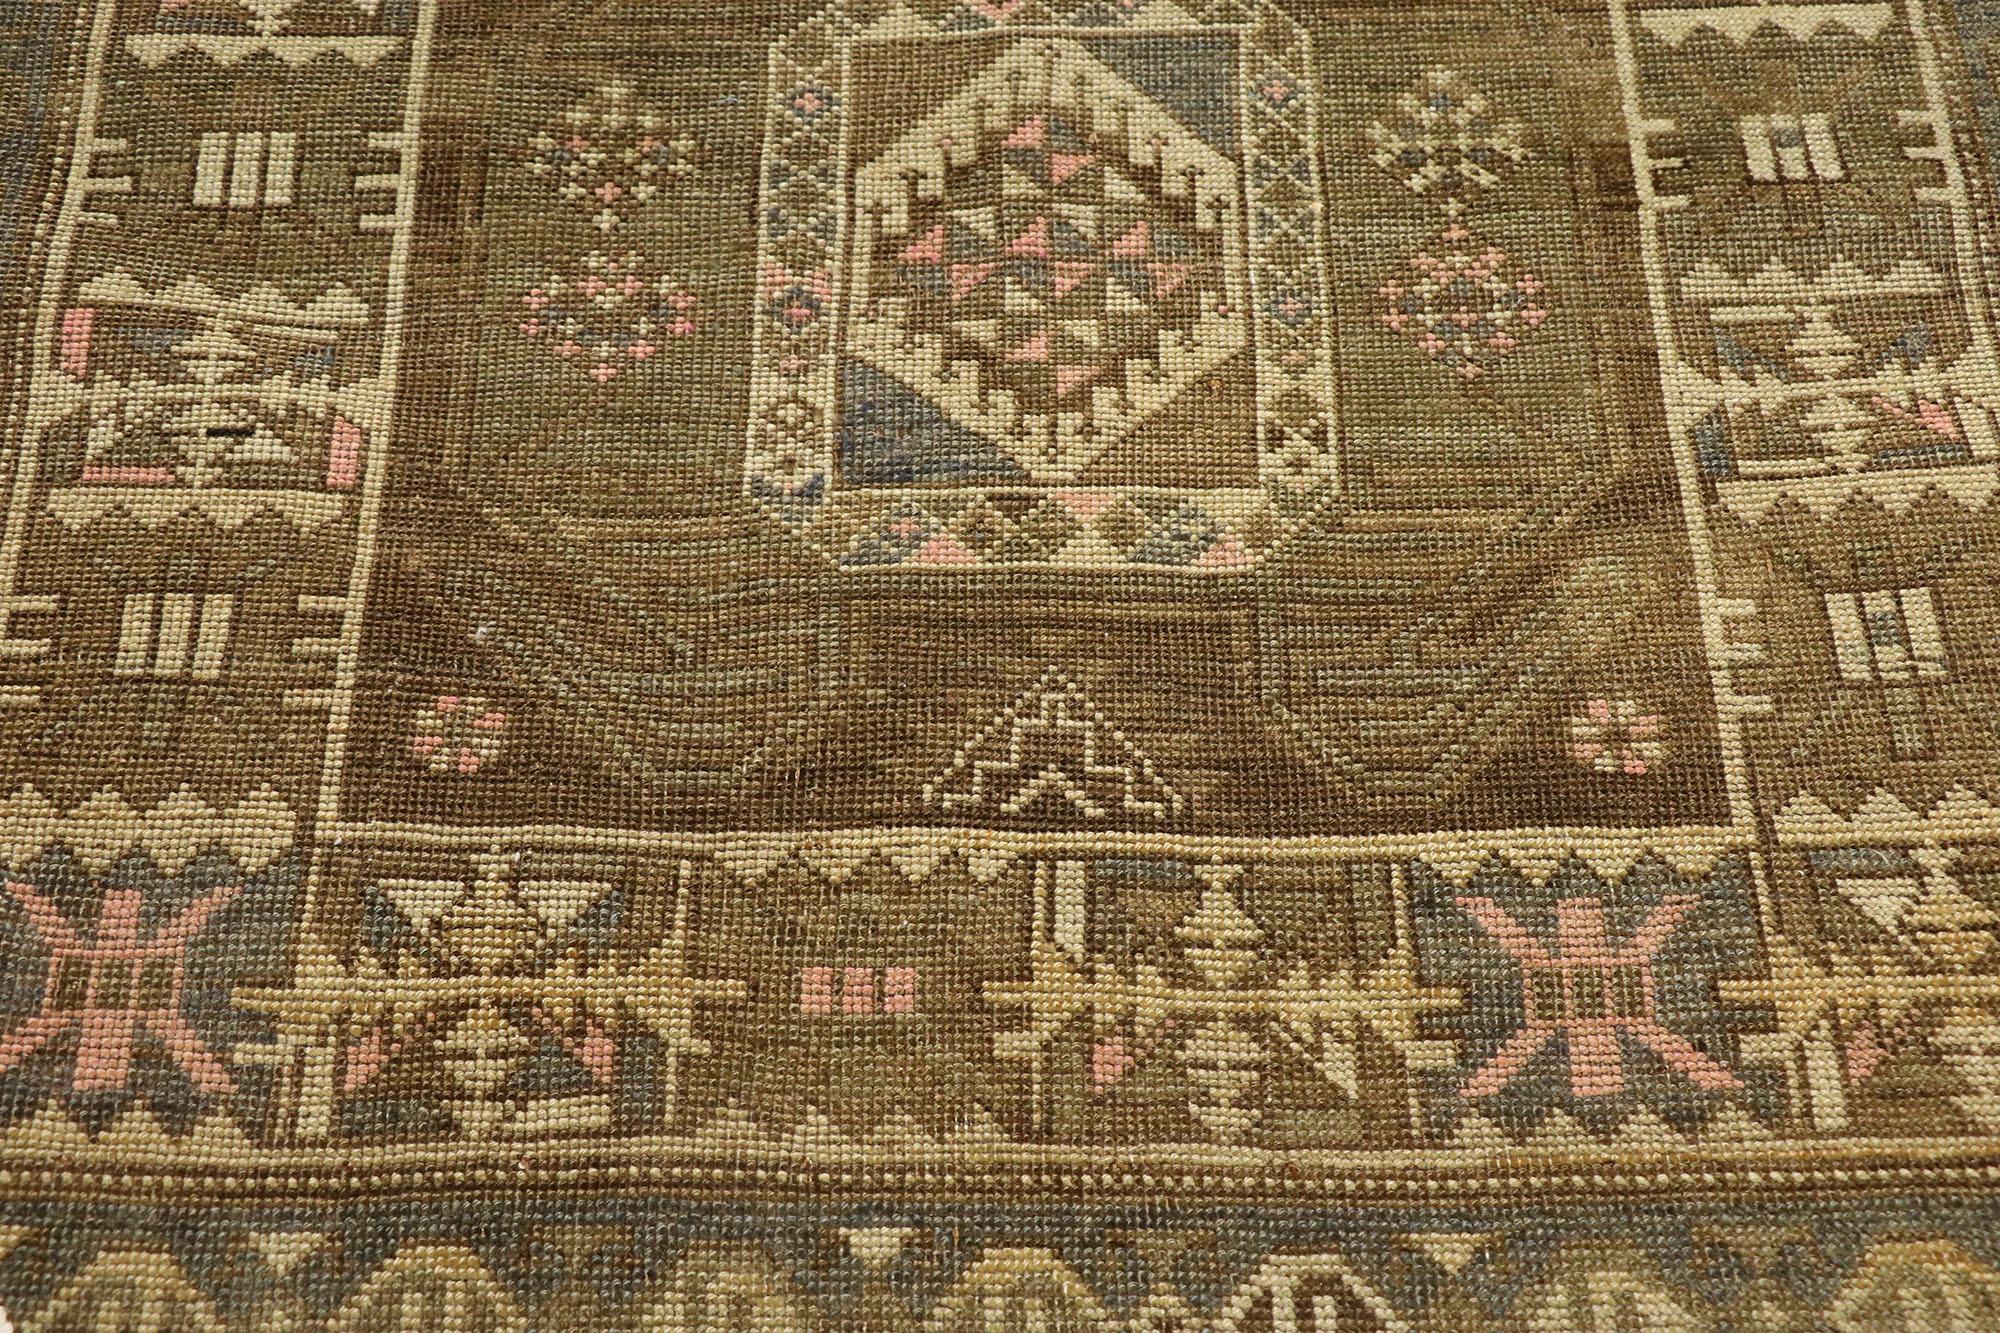 Antique Persian Azerbaijan Runner with Warm Tribal Style In Good Condition For Sale In Dallas, TX